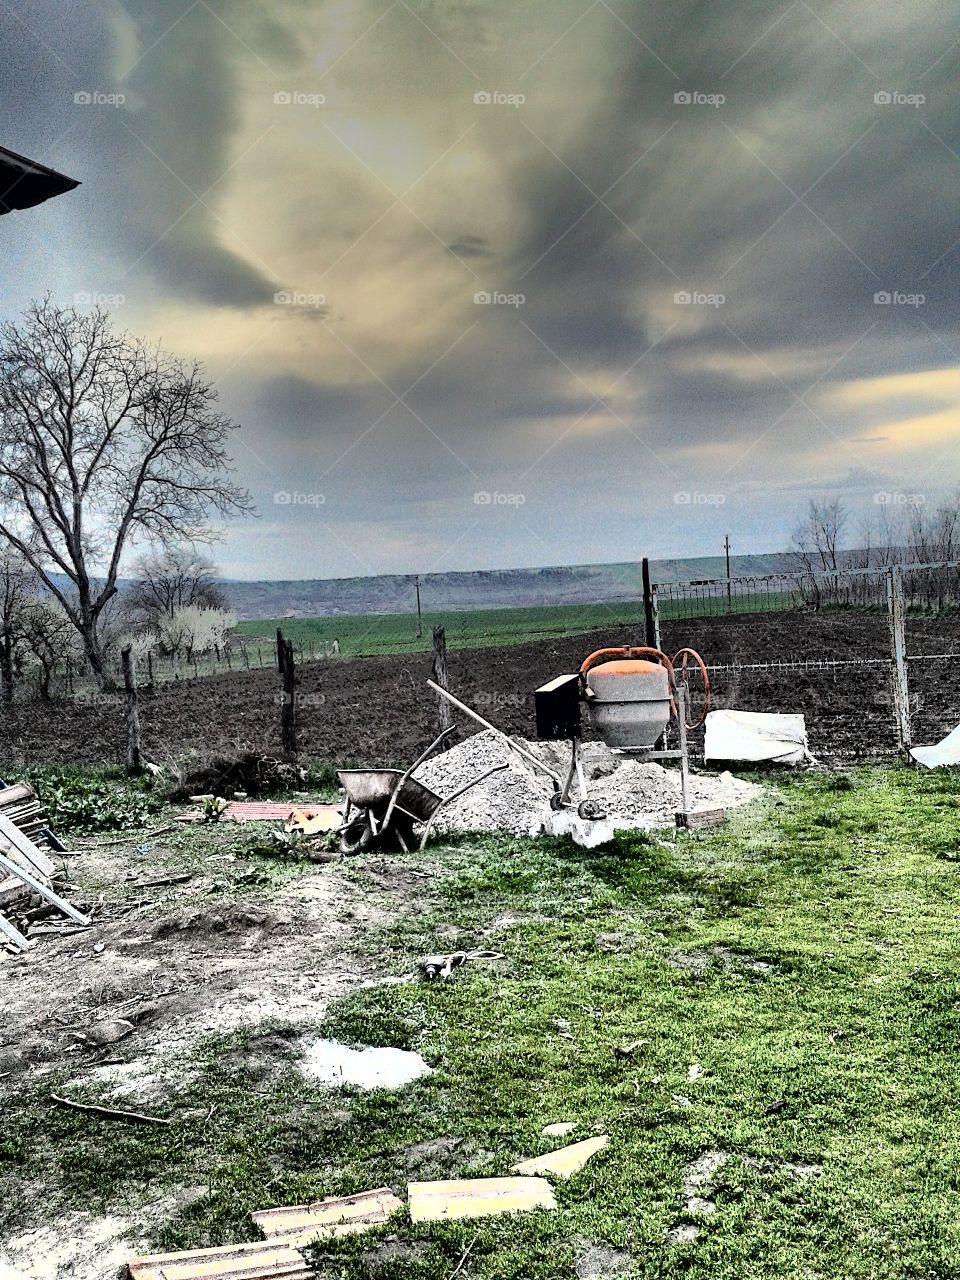 Rough workday. me and my dad were at my grampa to fix his house and this HDR just fits well the atmosphere.